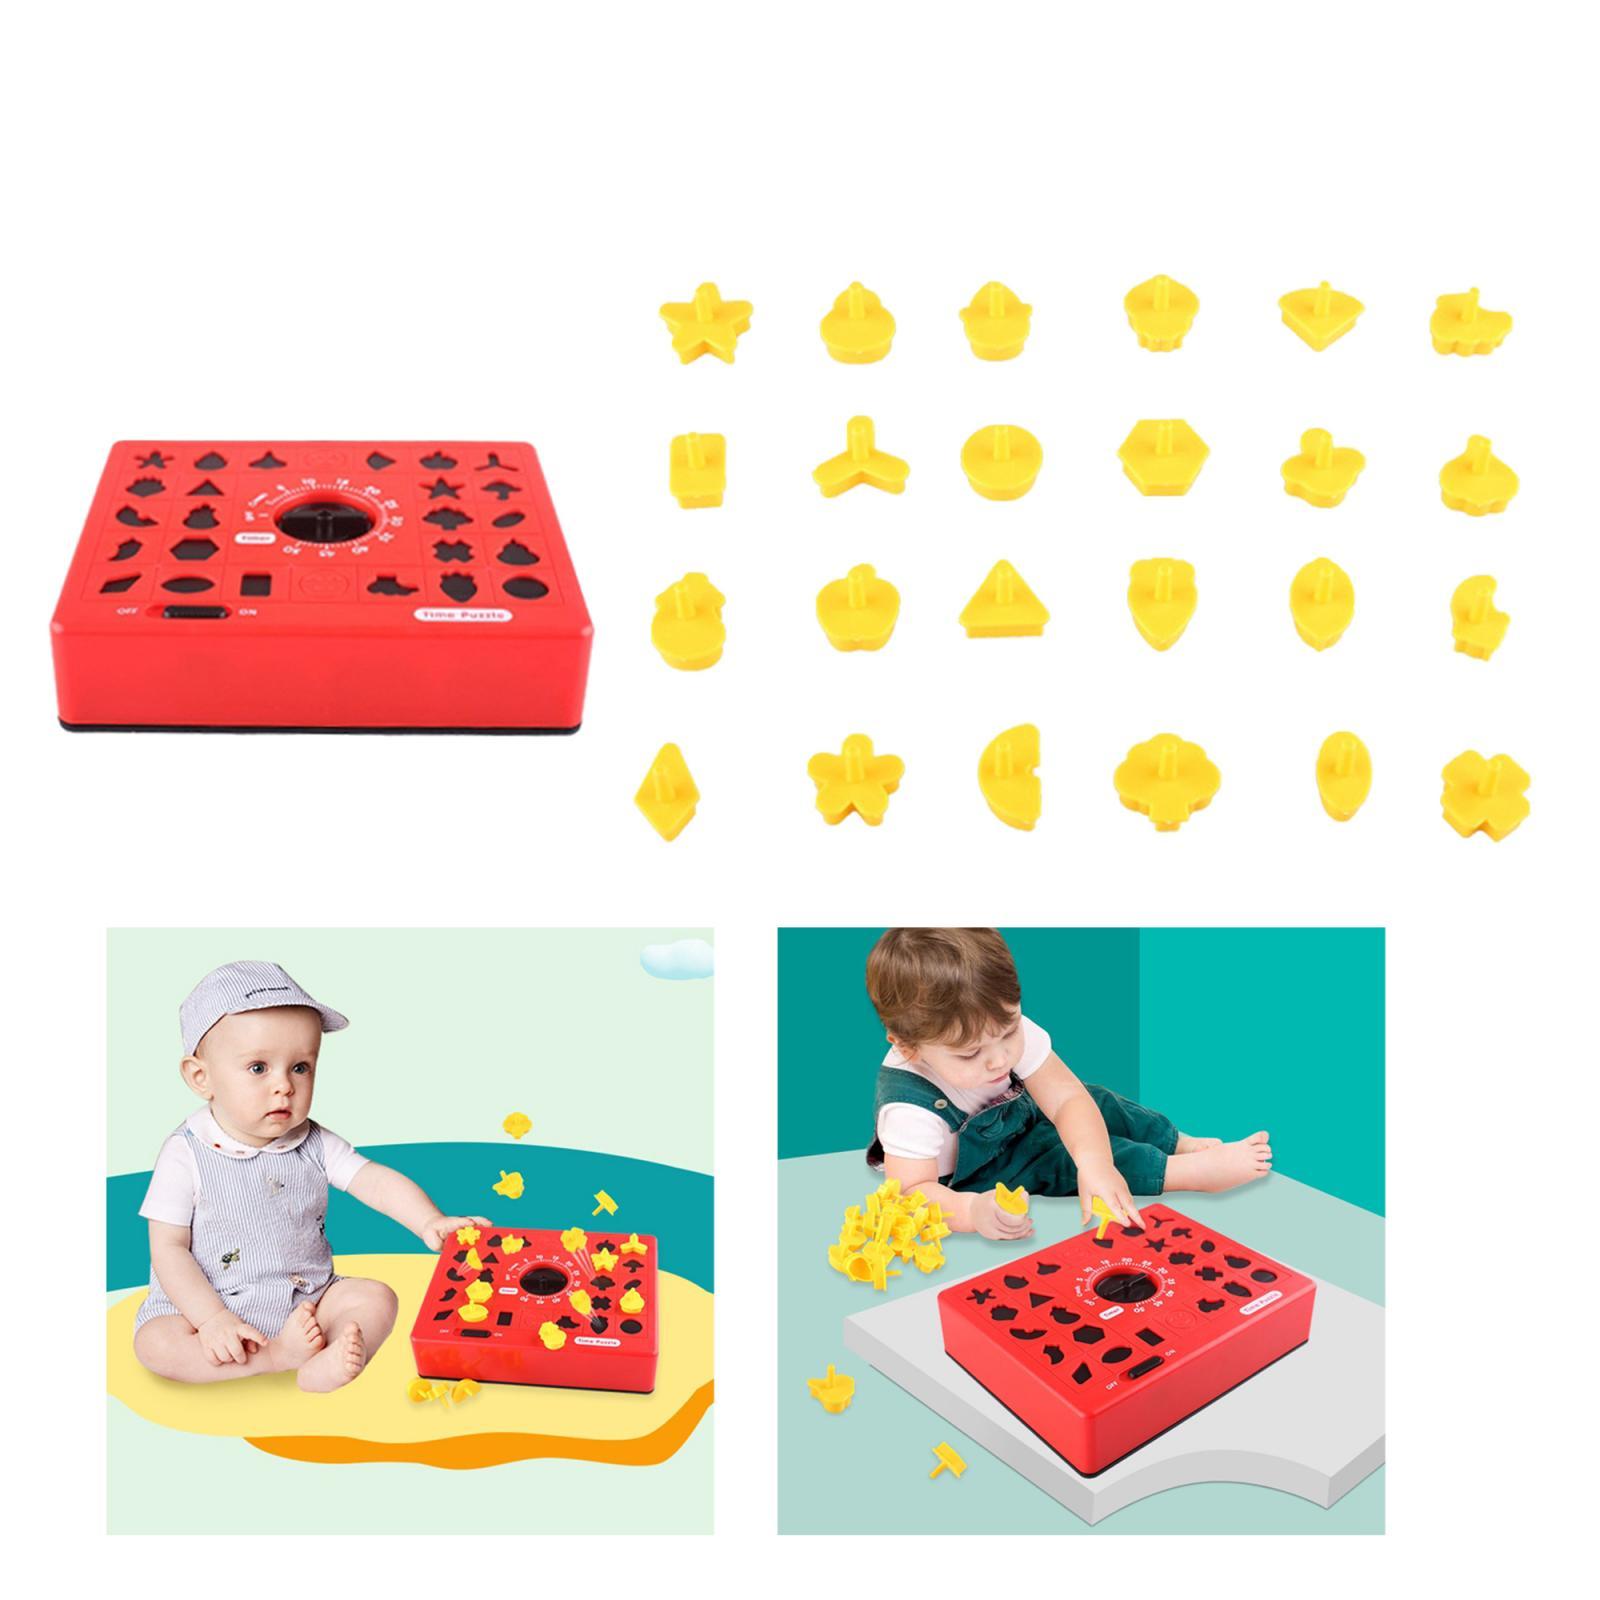 Matching Game Puzzle Board Game Educational Interaction Matching Game Toy Set for Kids Adults